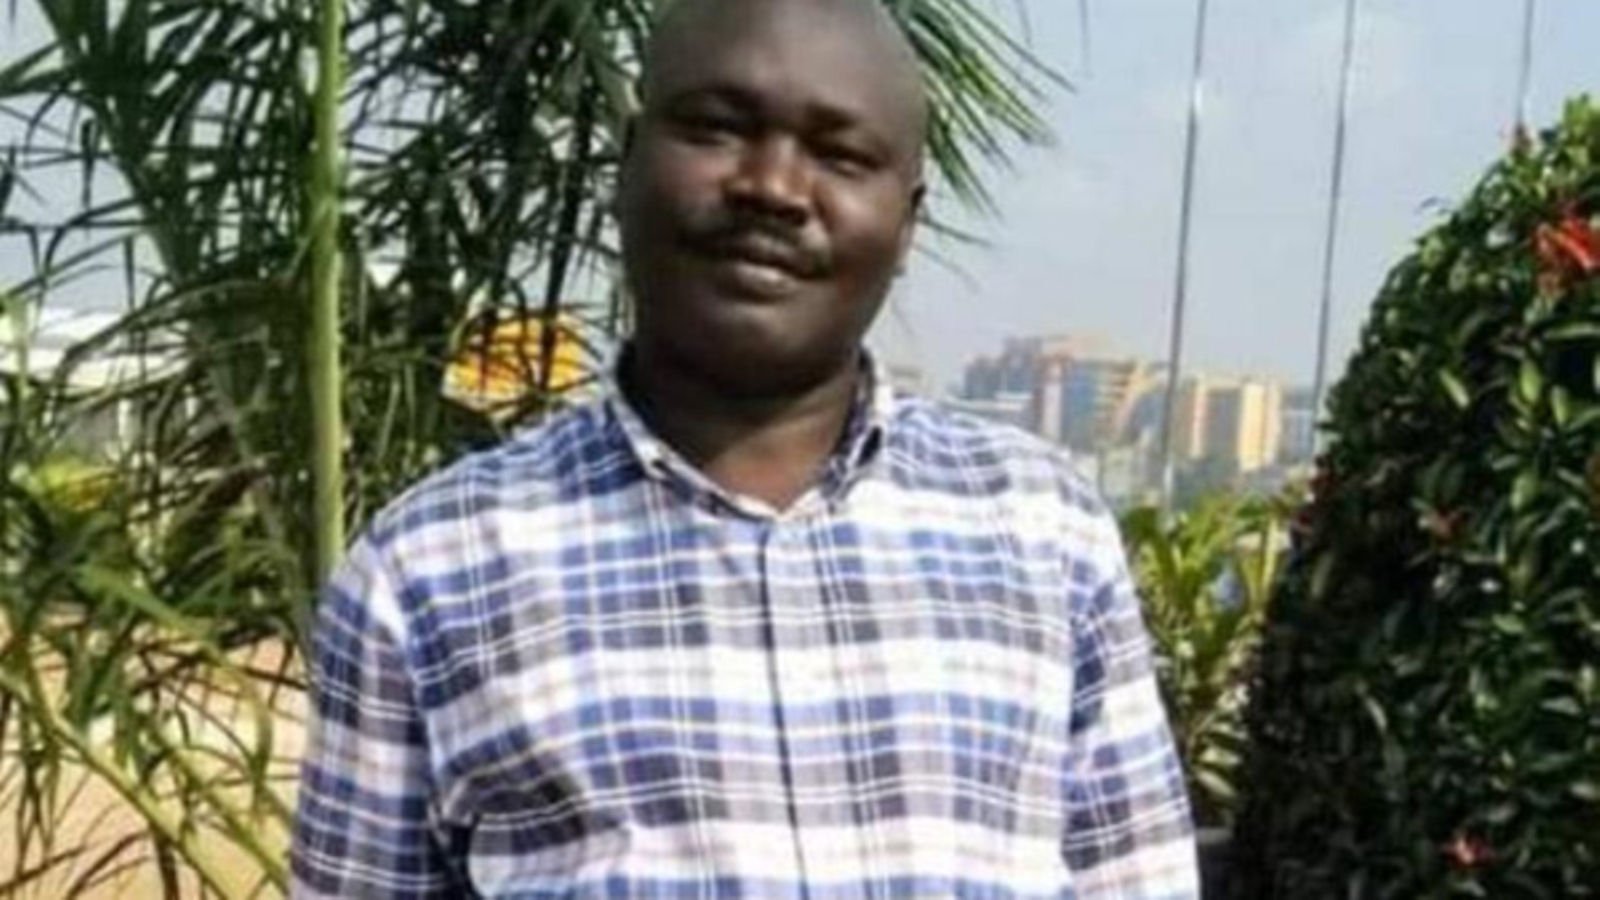 Ugandans launch fundraising campaign for arrested driver who complained about Judiciary’s low pay